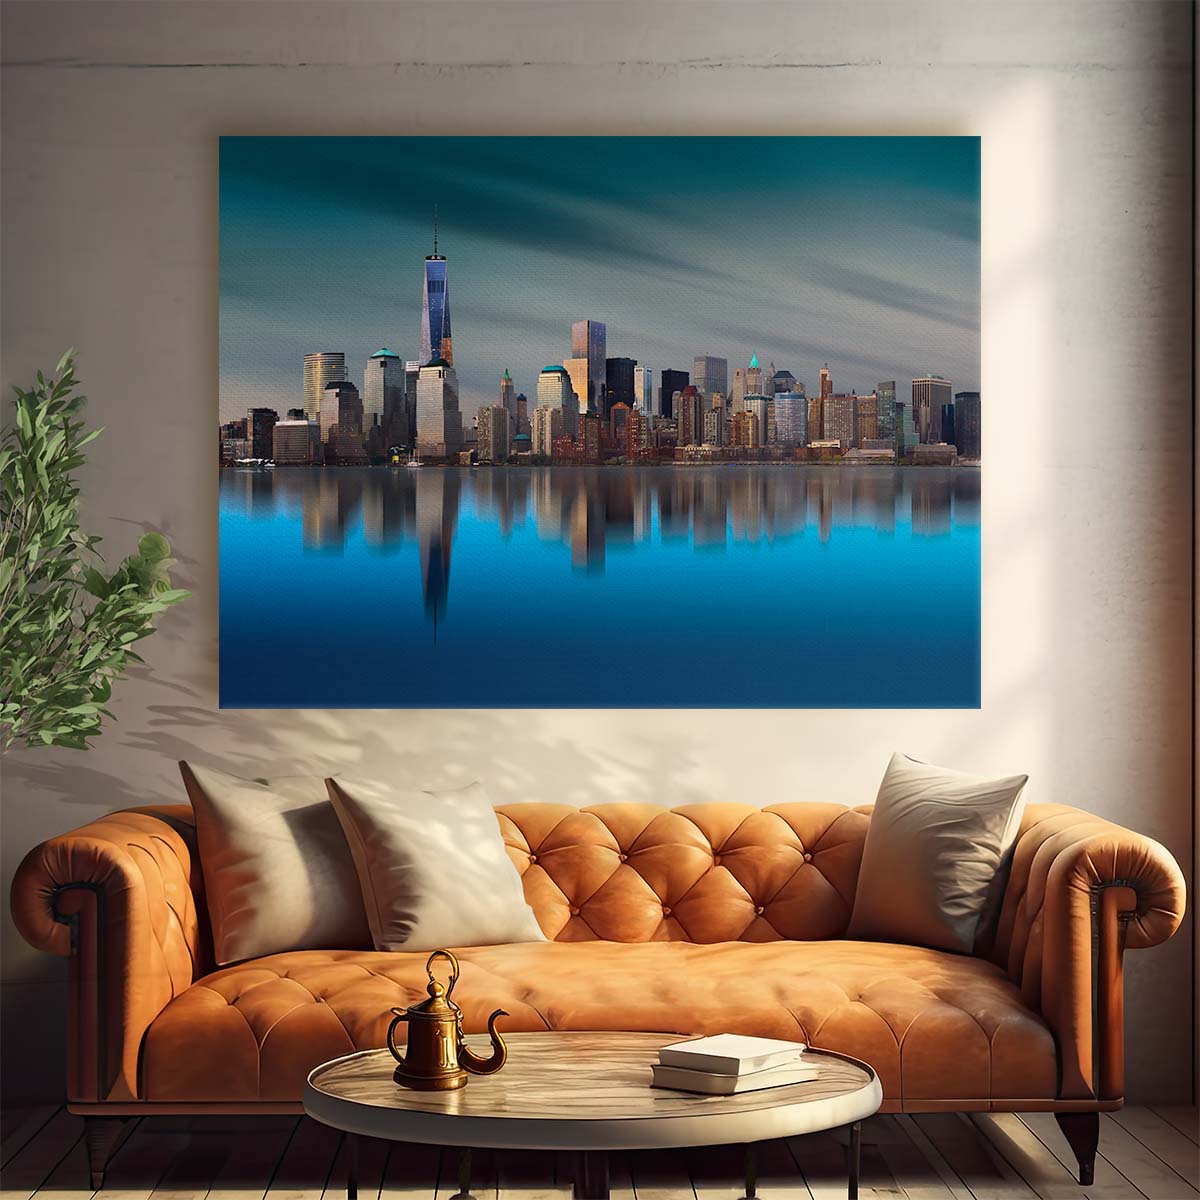 NYC Skyline & World Trade Center Panoramic Wall Art by Luxuriance Designs. Made in USA.